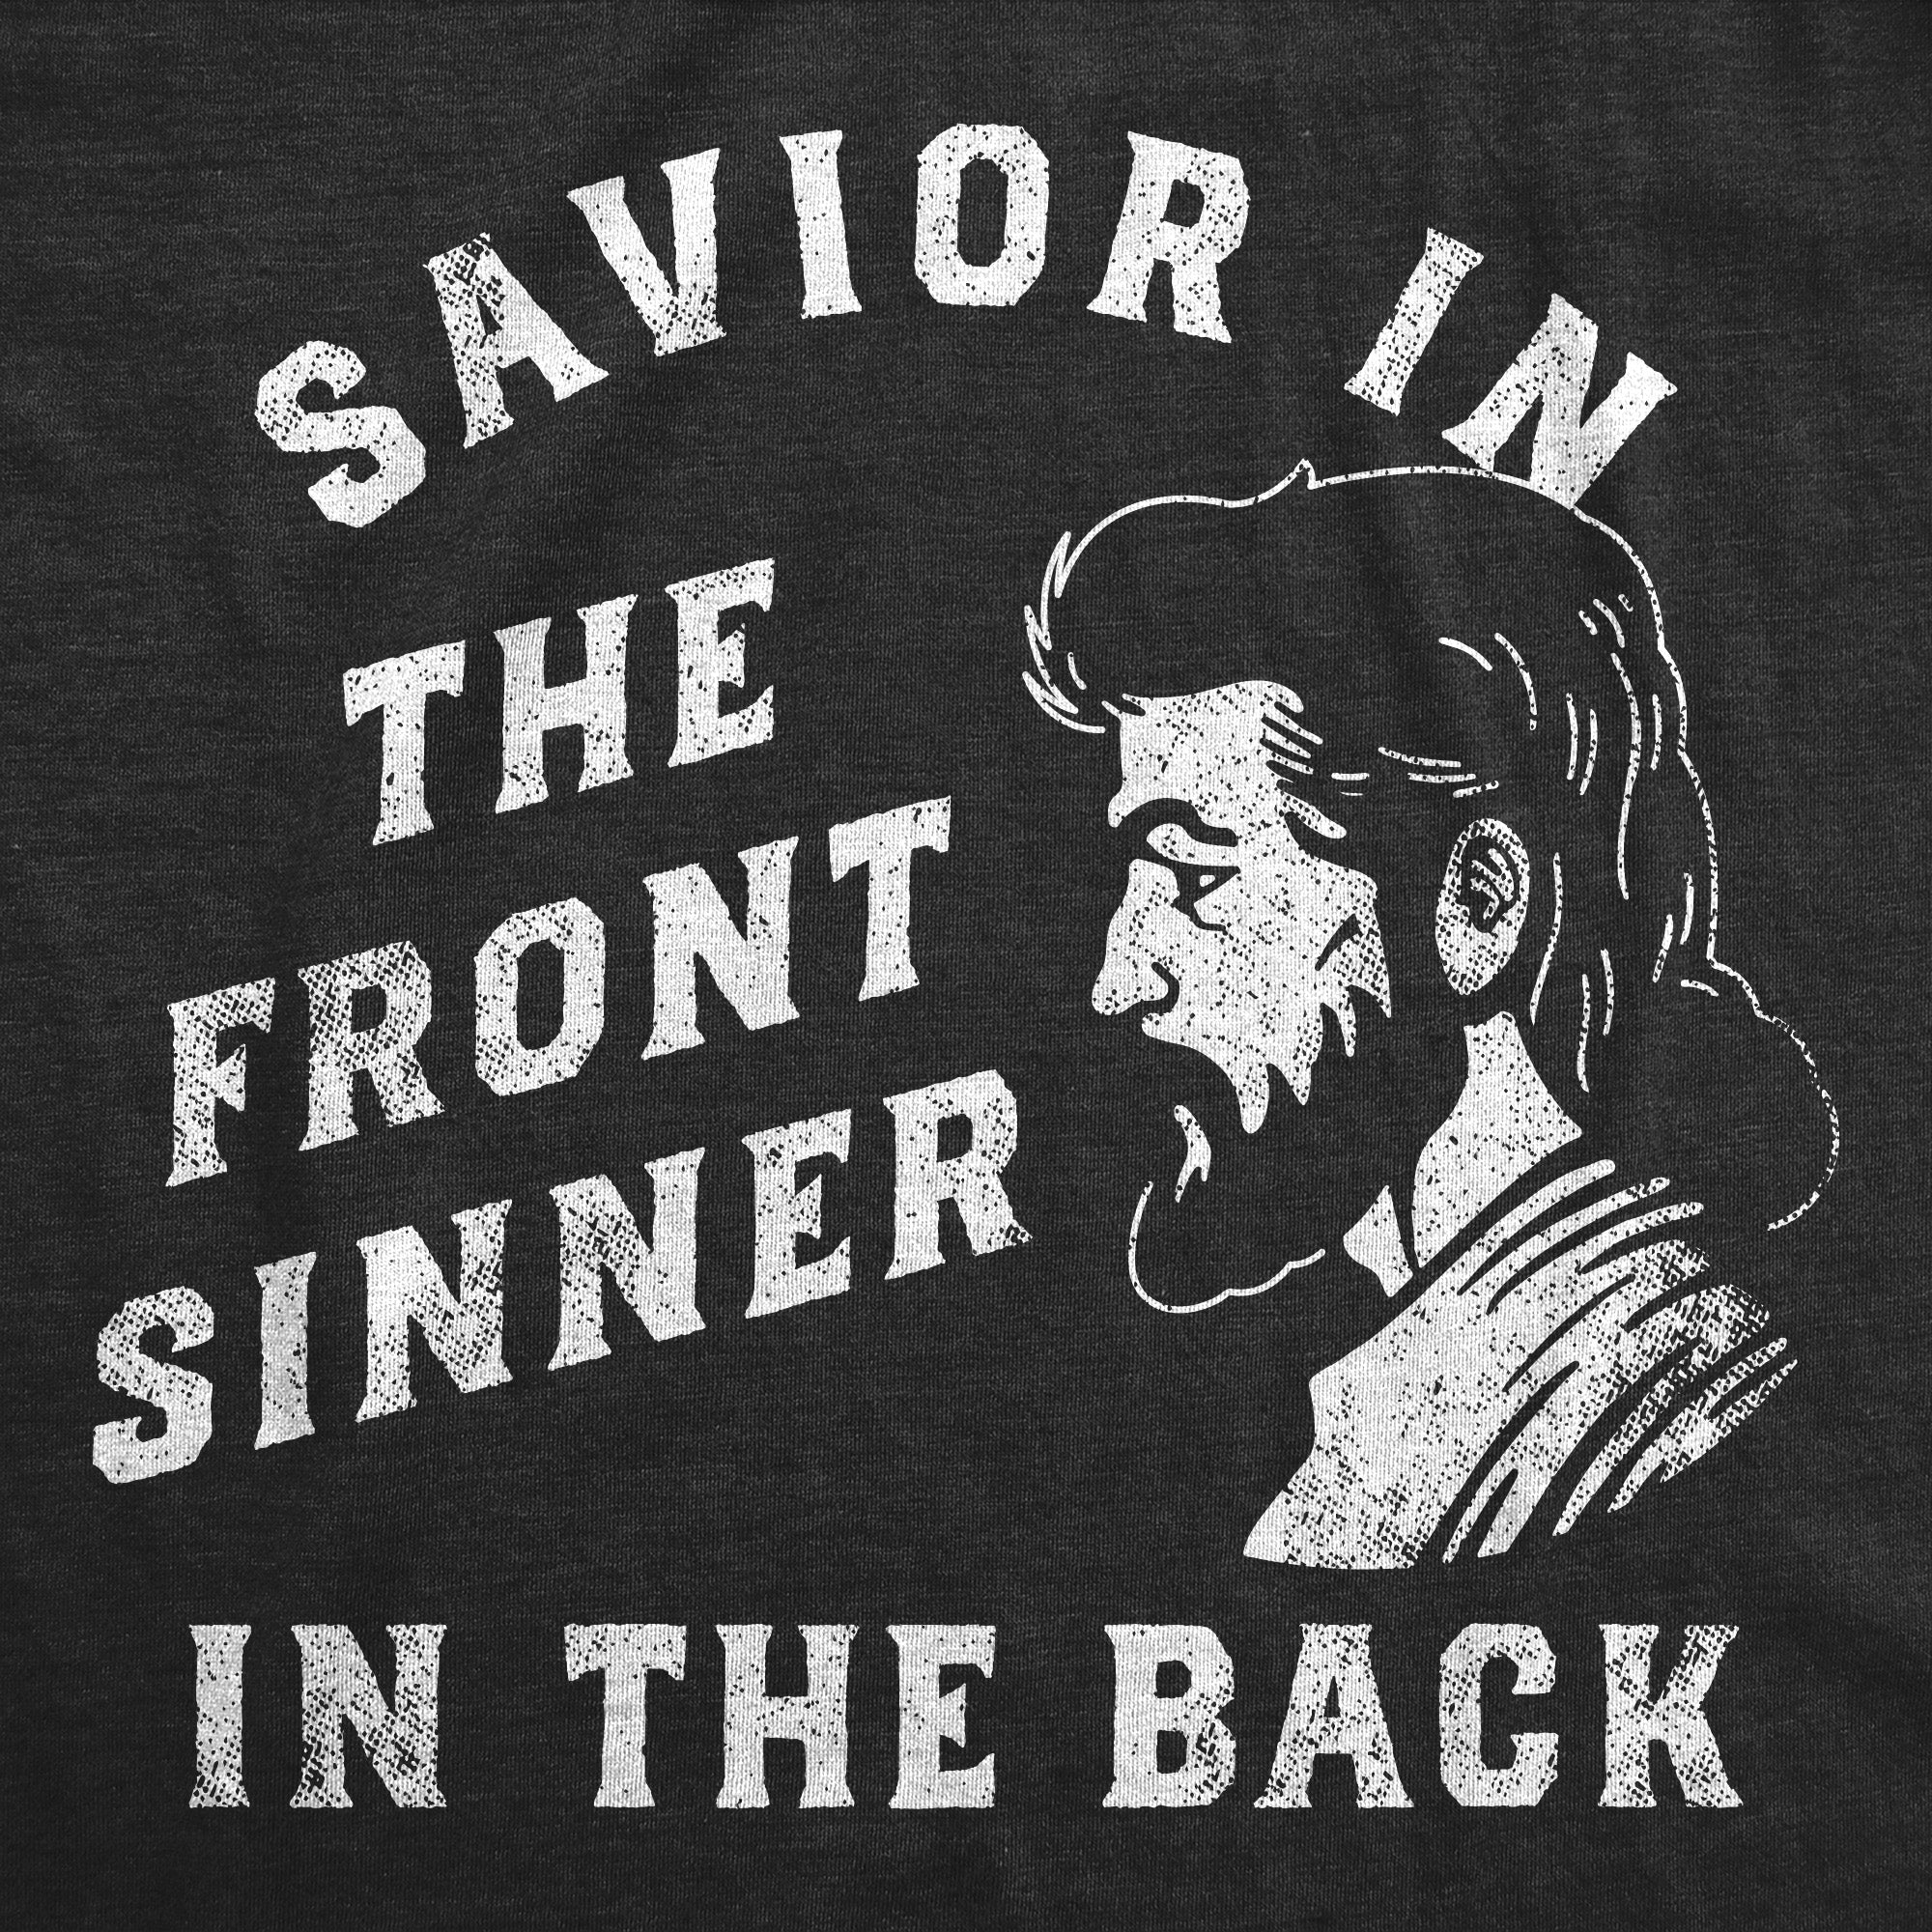 Funny Heather Black - Savior Sinner Savior In The Front Sinner In The Back Mens T Shirt Nerdy Sarcastic Tee